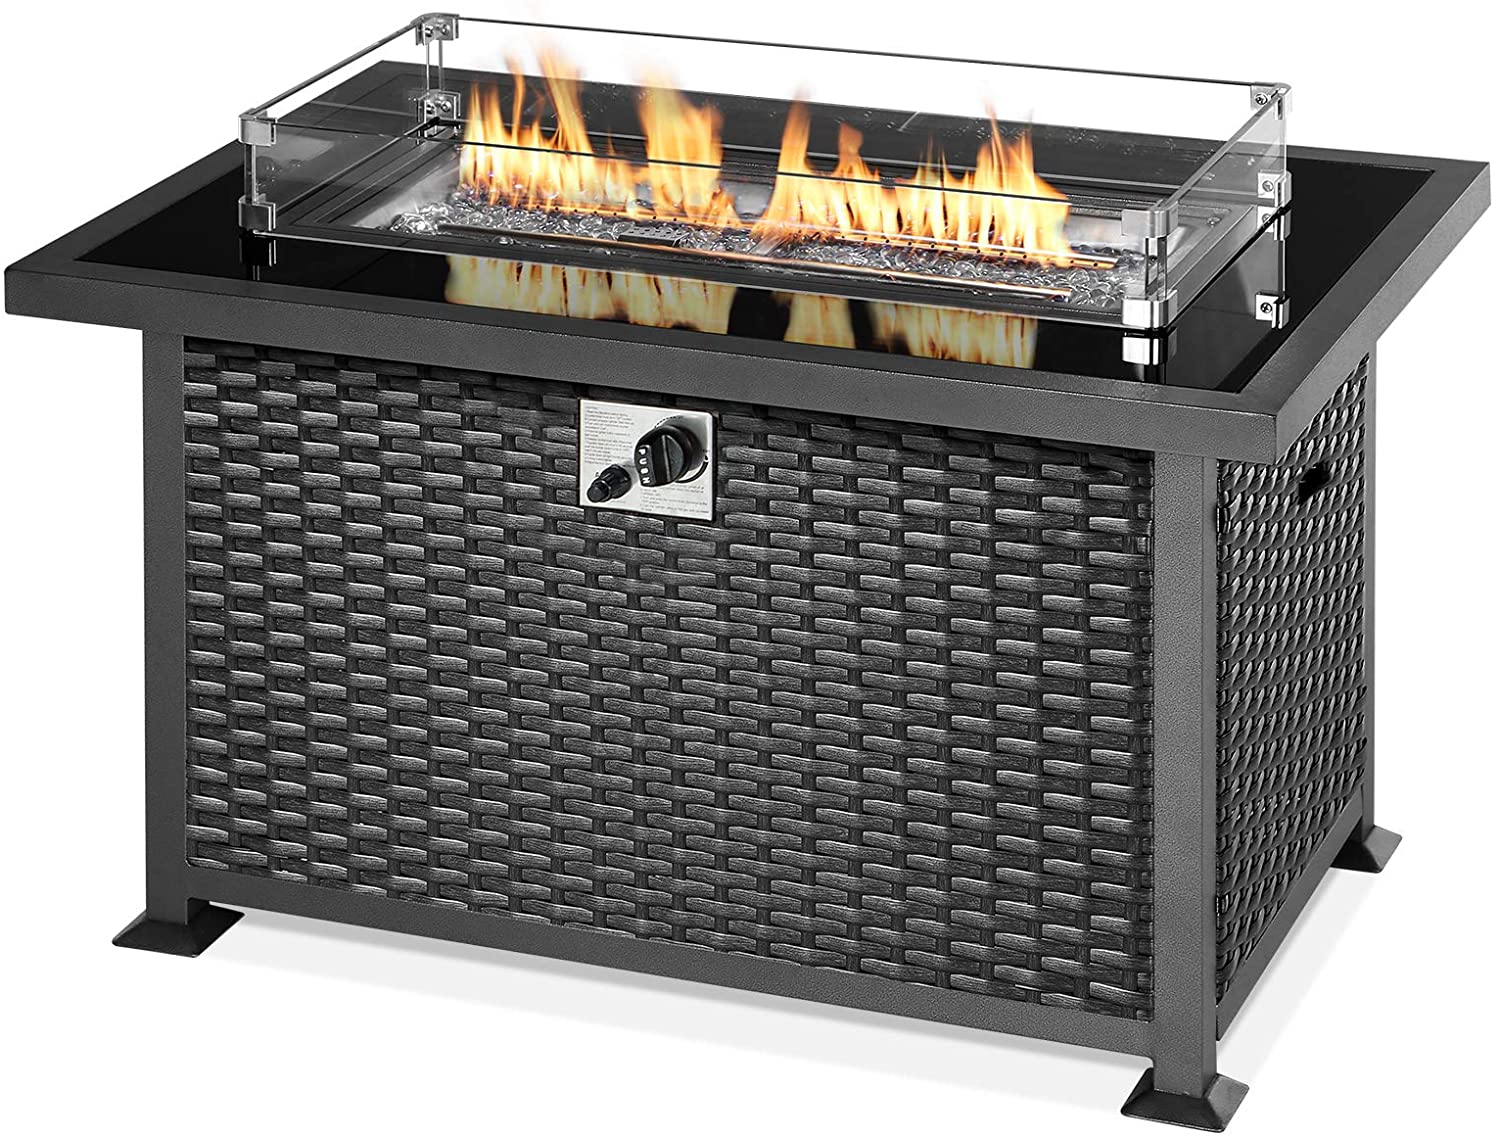 U-MAX 44in Outdoor Propane Gas Fire Pit Table